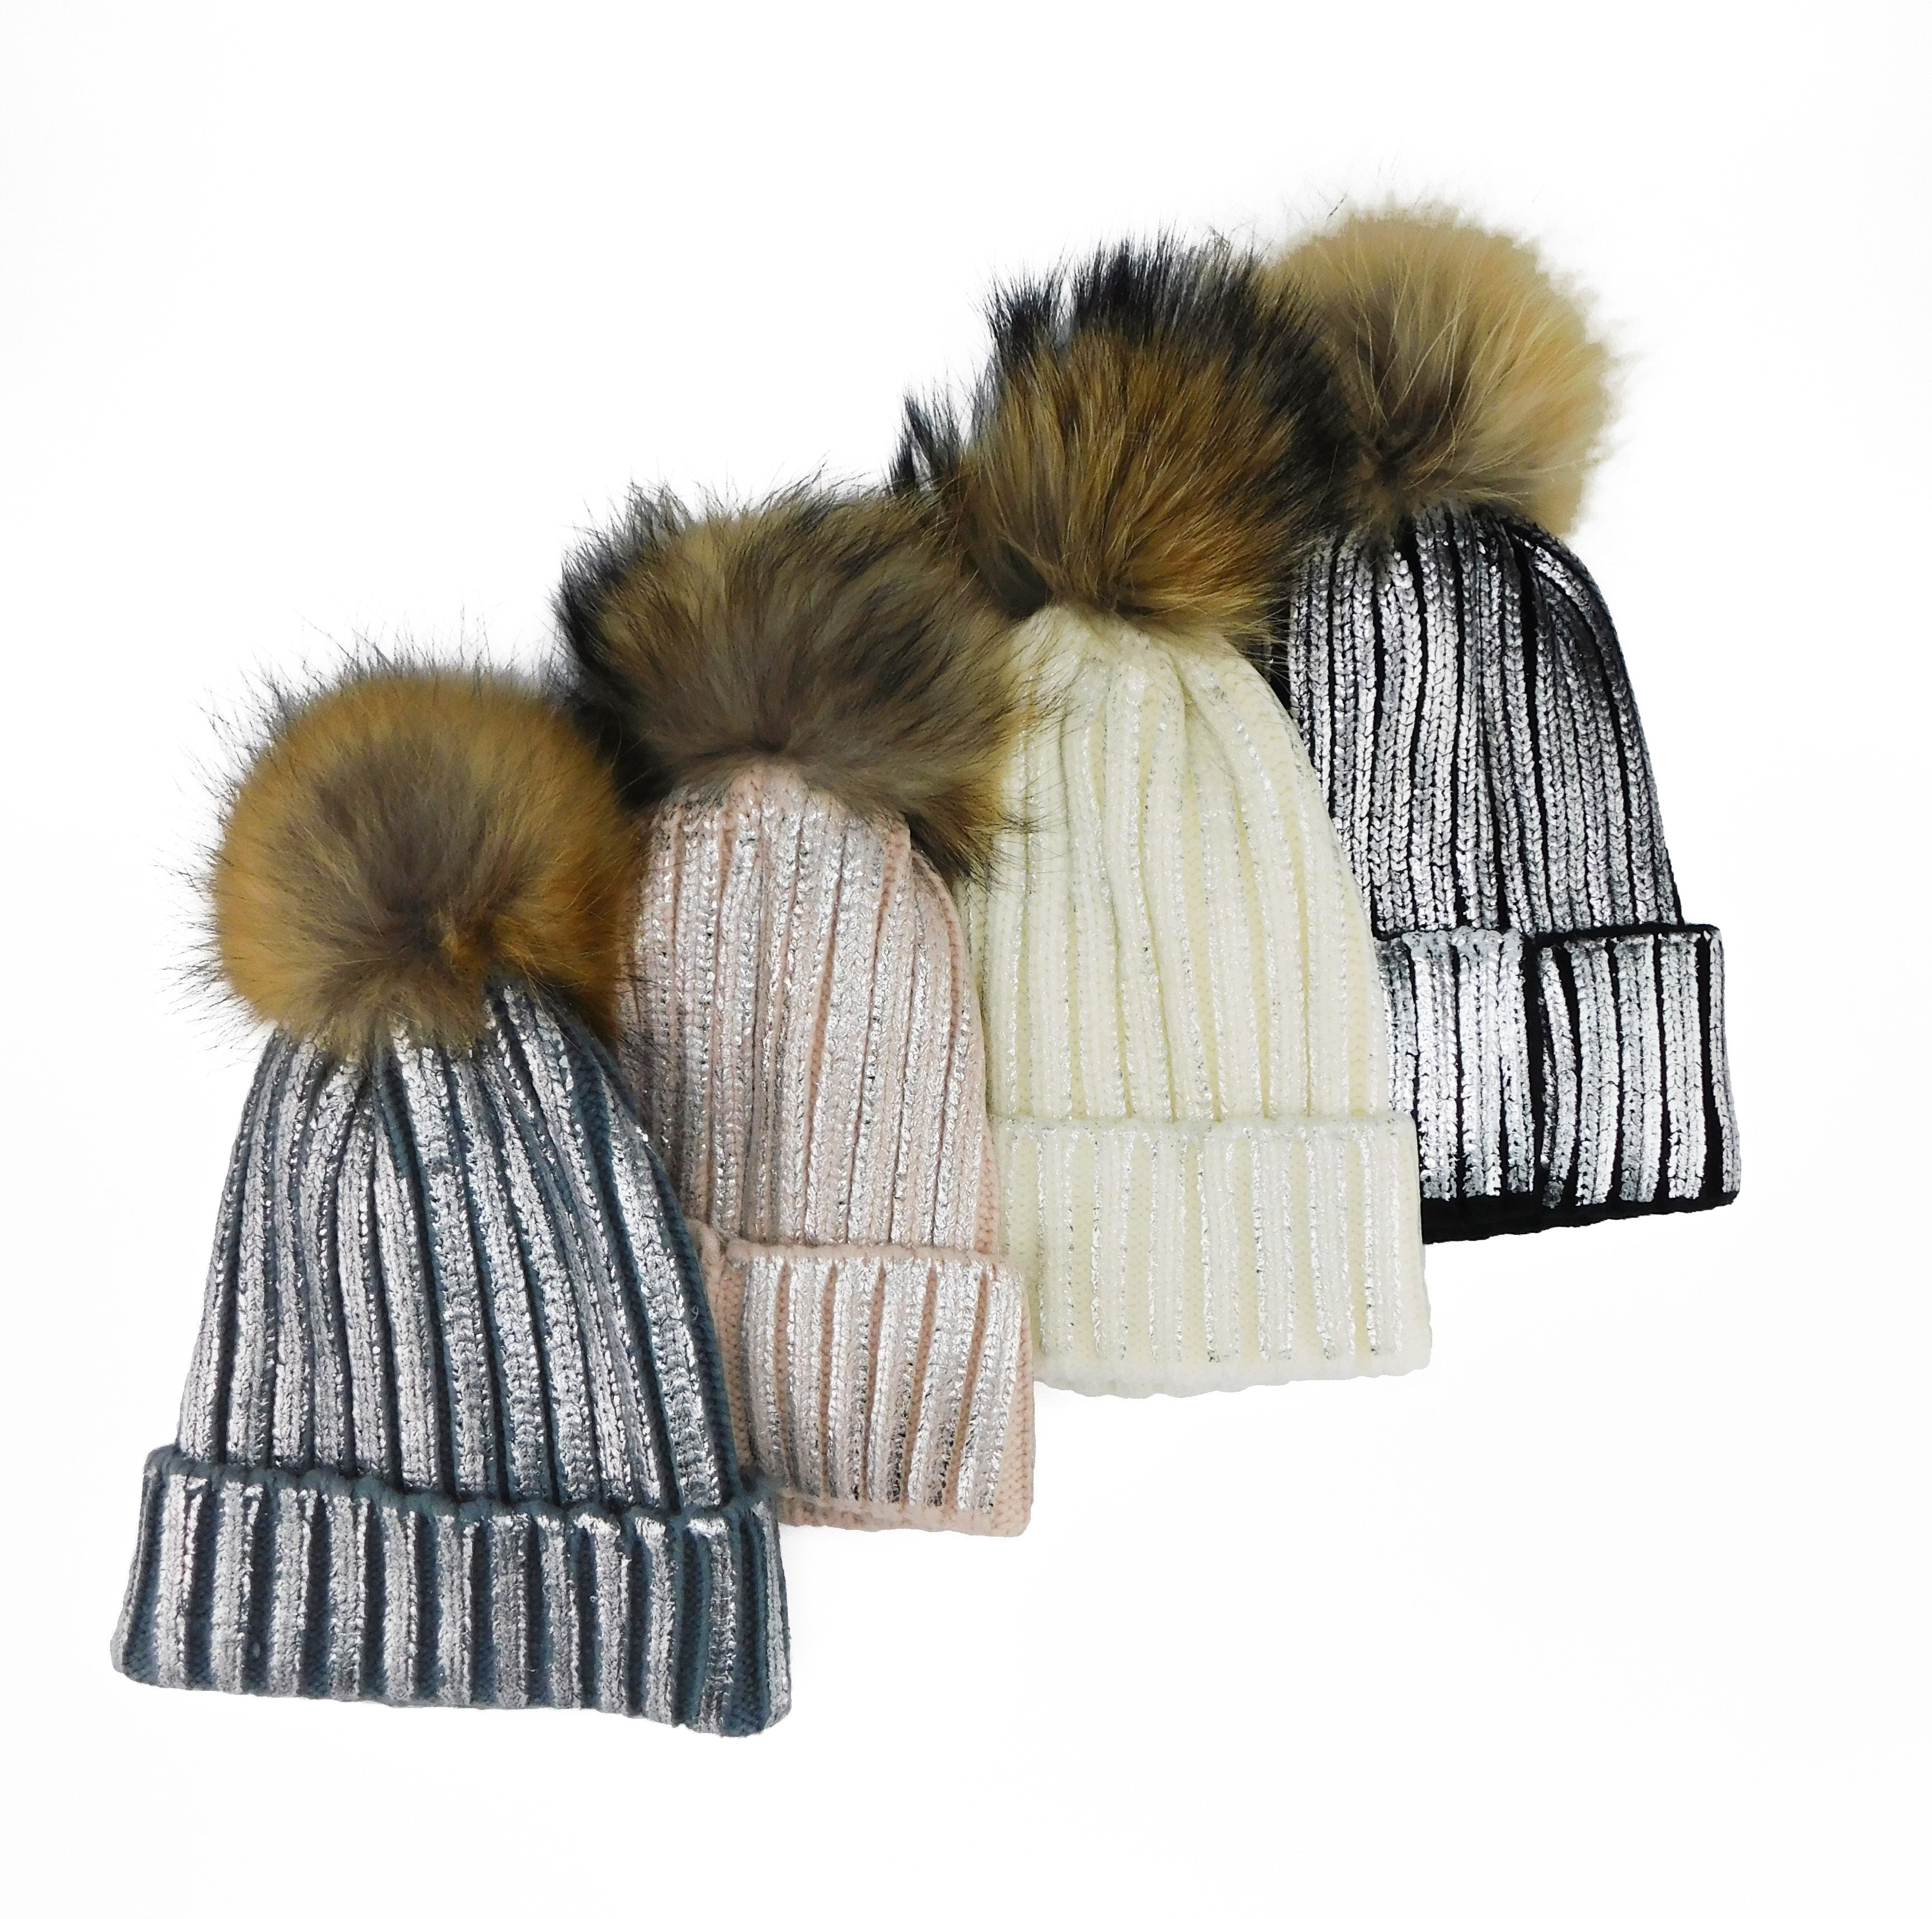 Metallic Striped Knitted Beanie with Removable Fur Poms - paulamariecollection